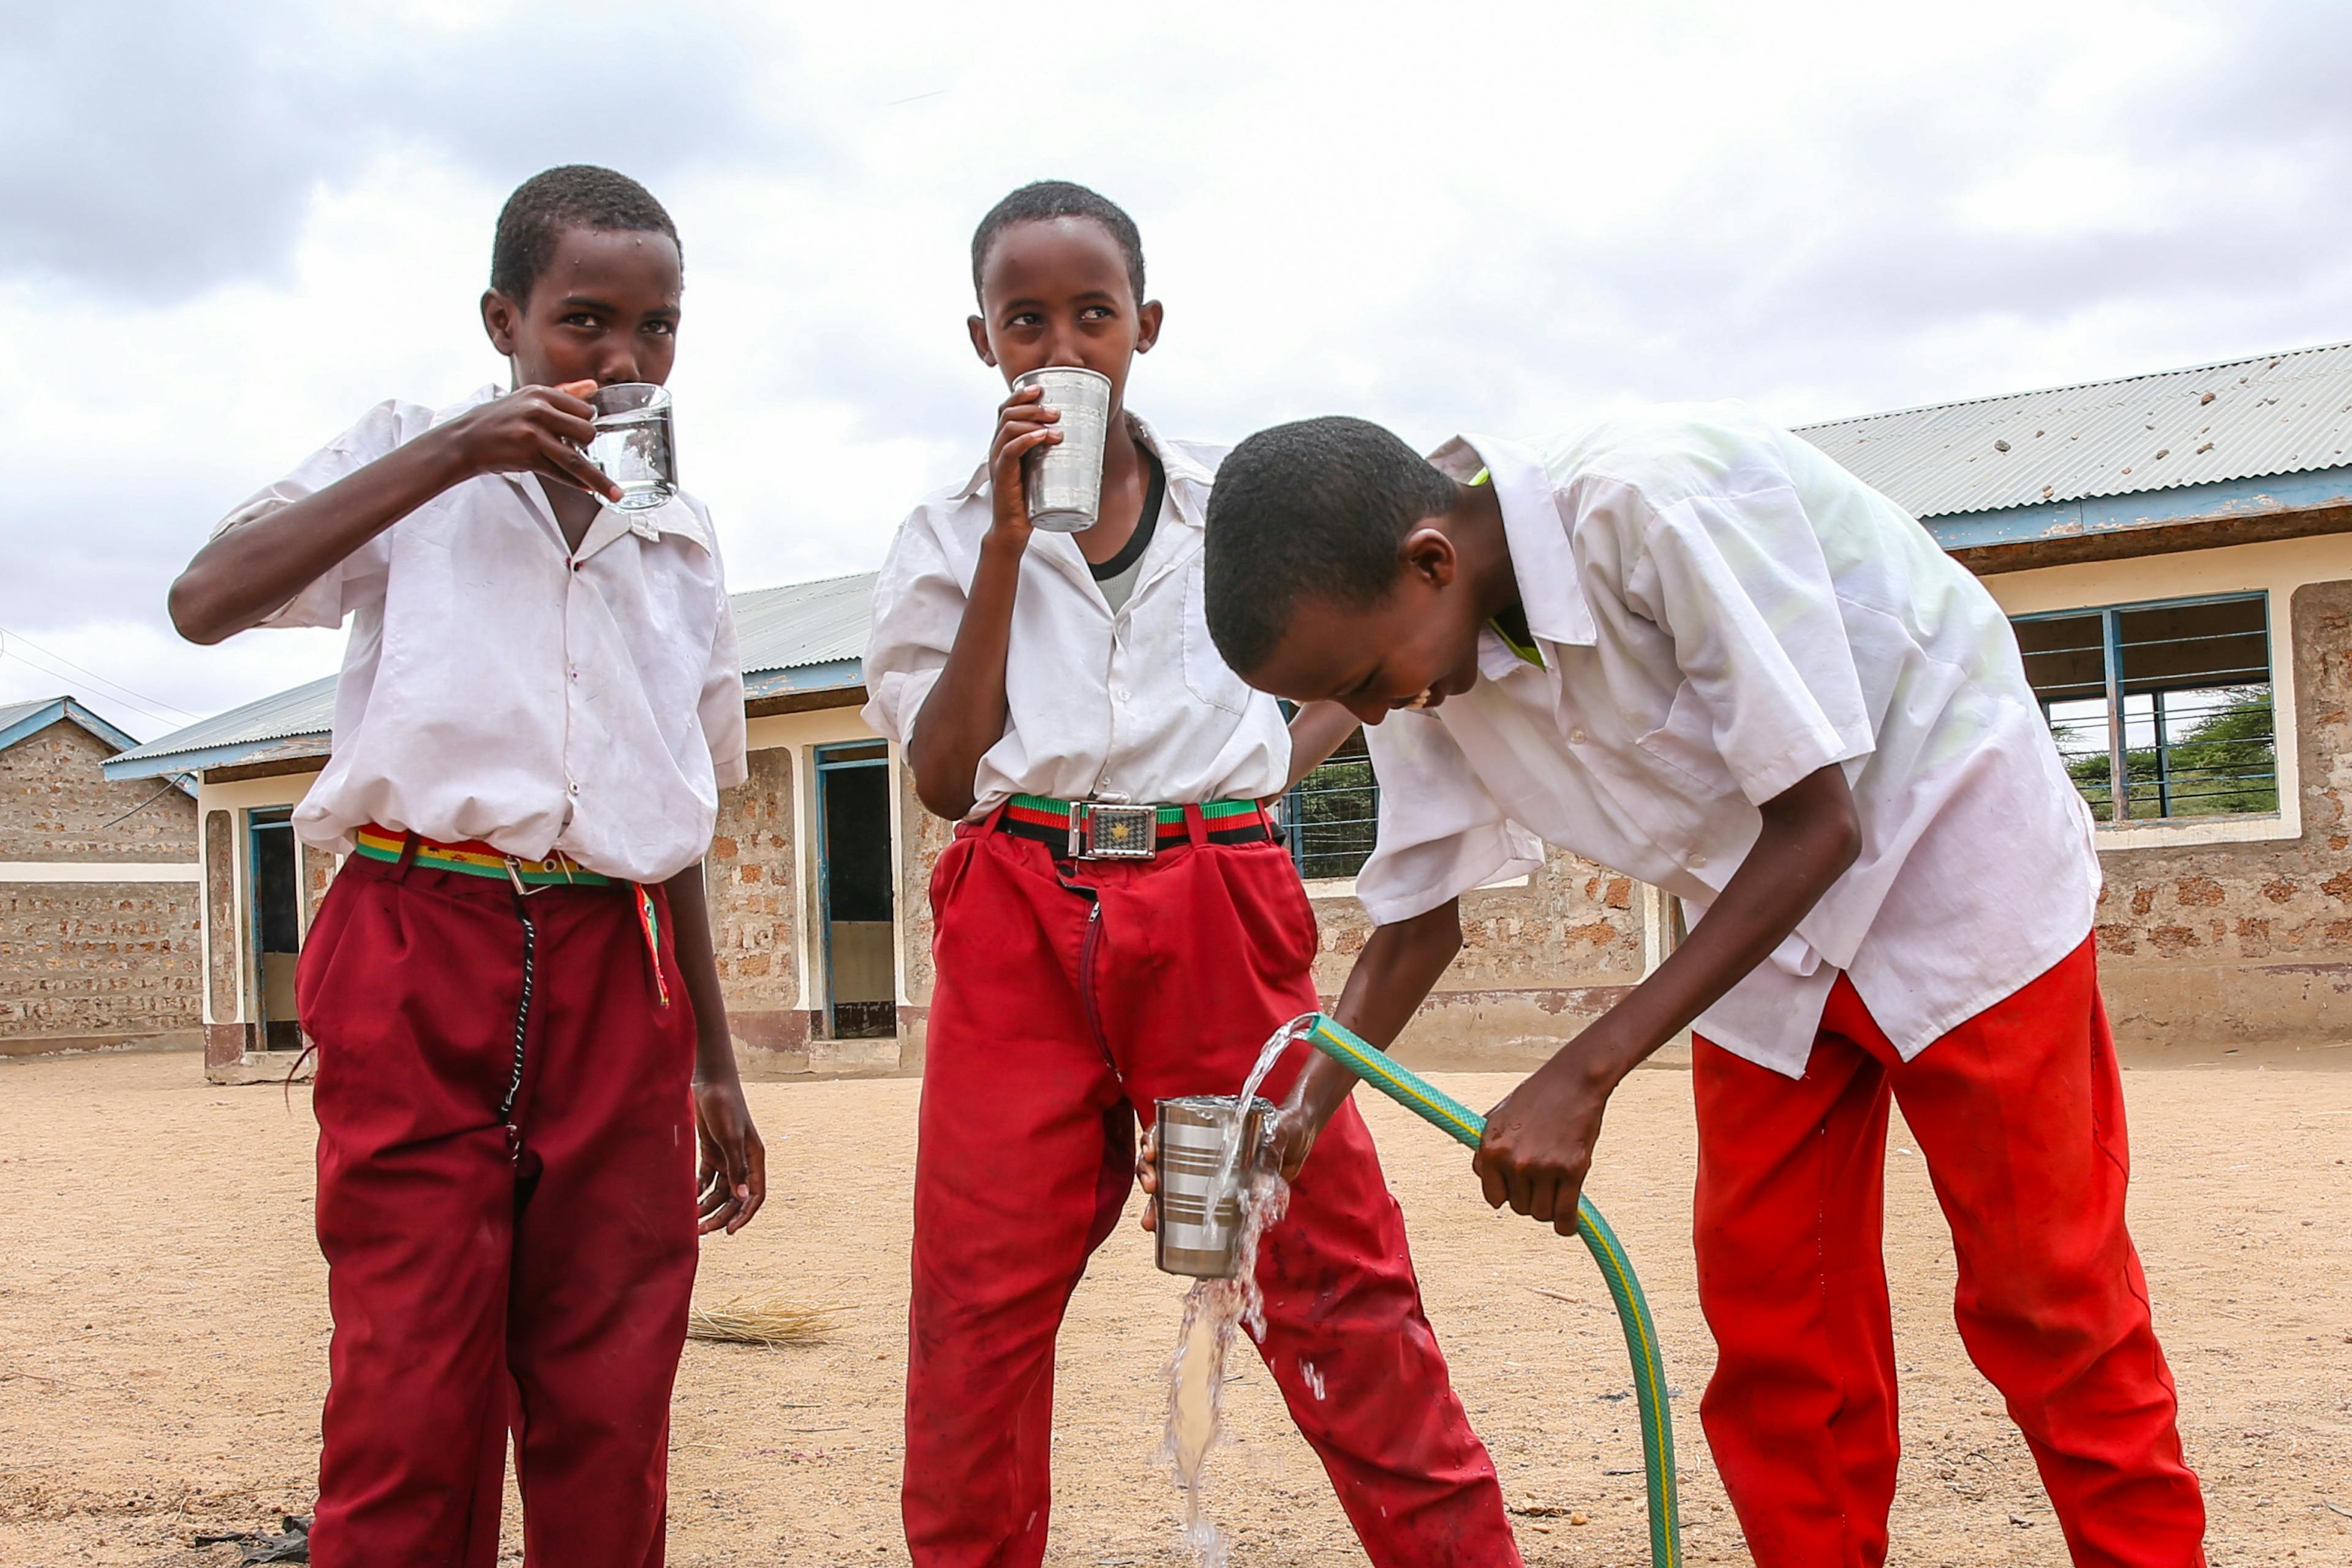 young boys filling glasses of water thanks to water system providing access to safe drinking water